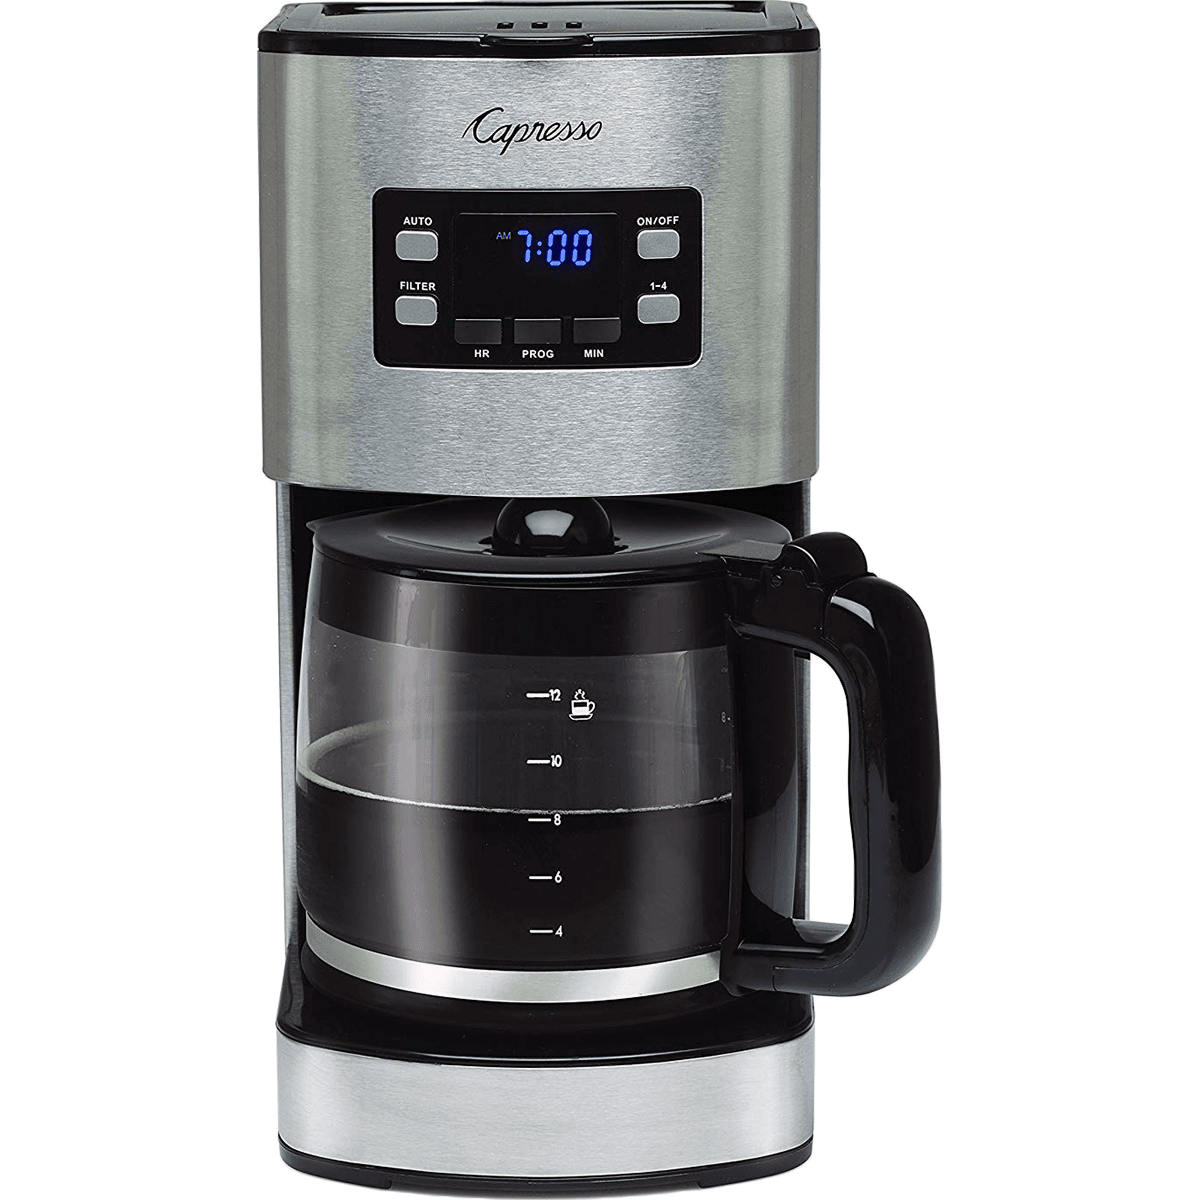 Capresso Sg300 12-cup Stainless Steel Coffee Maker With Glass Carafe